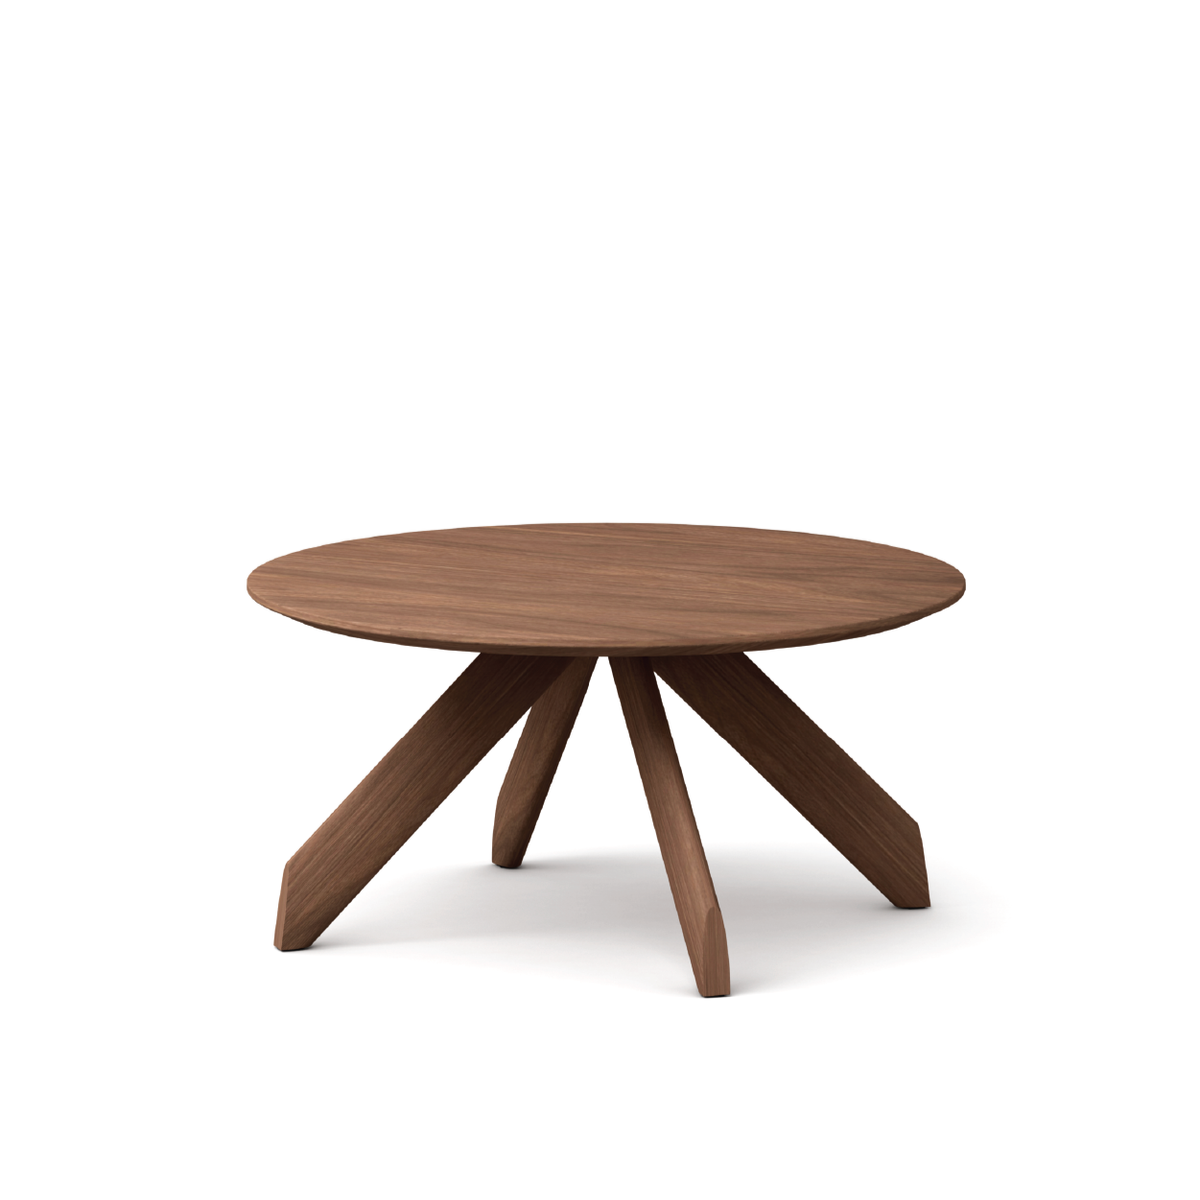 CT02 Side Table from ¥2,499